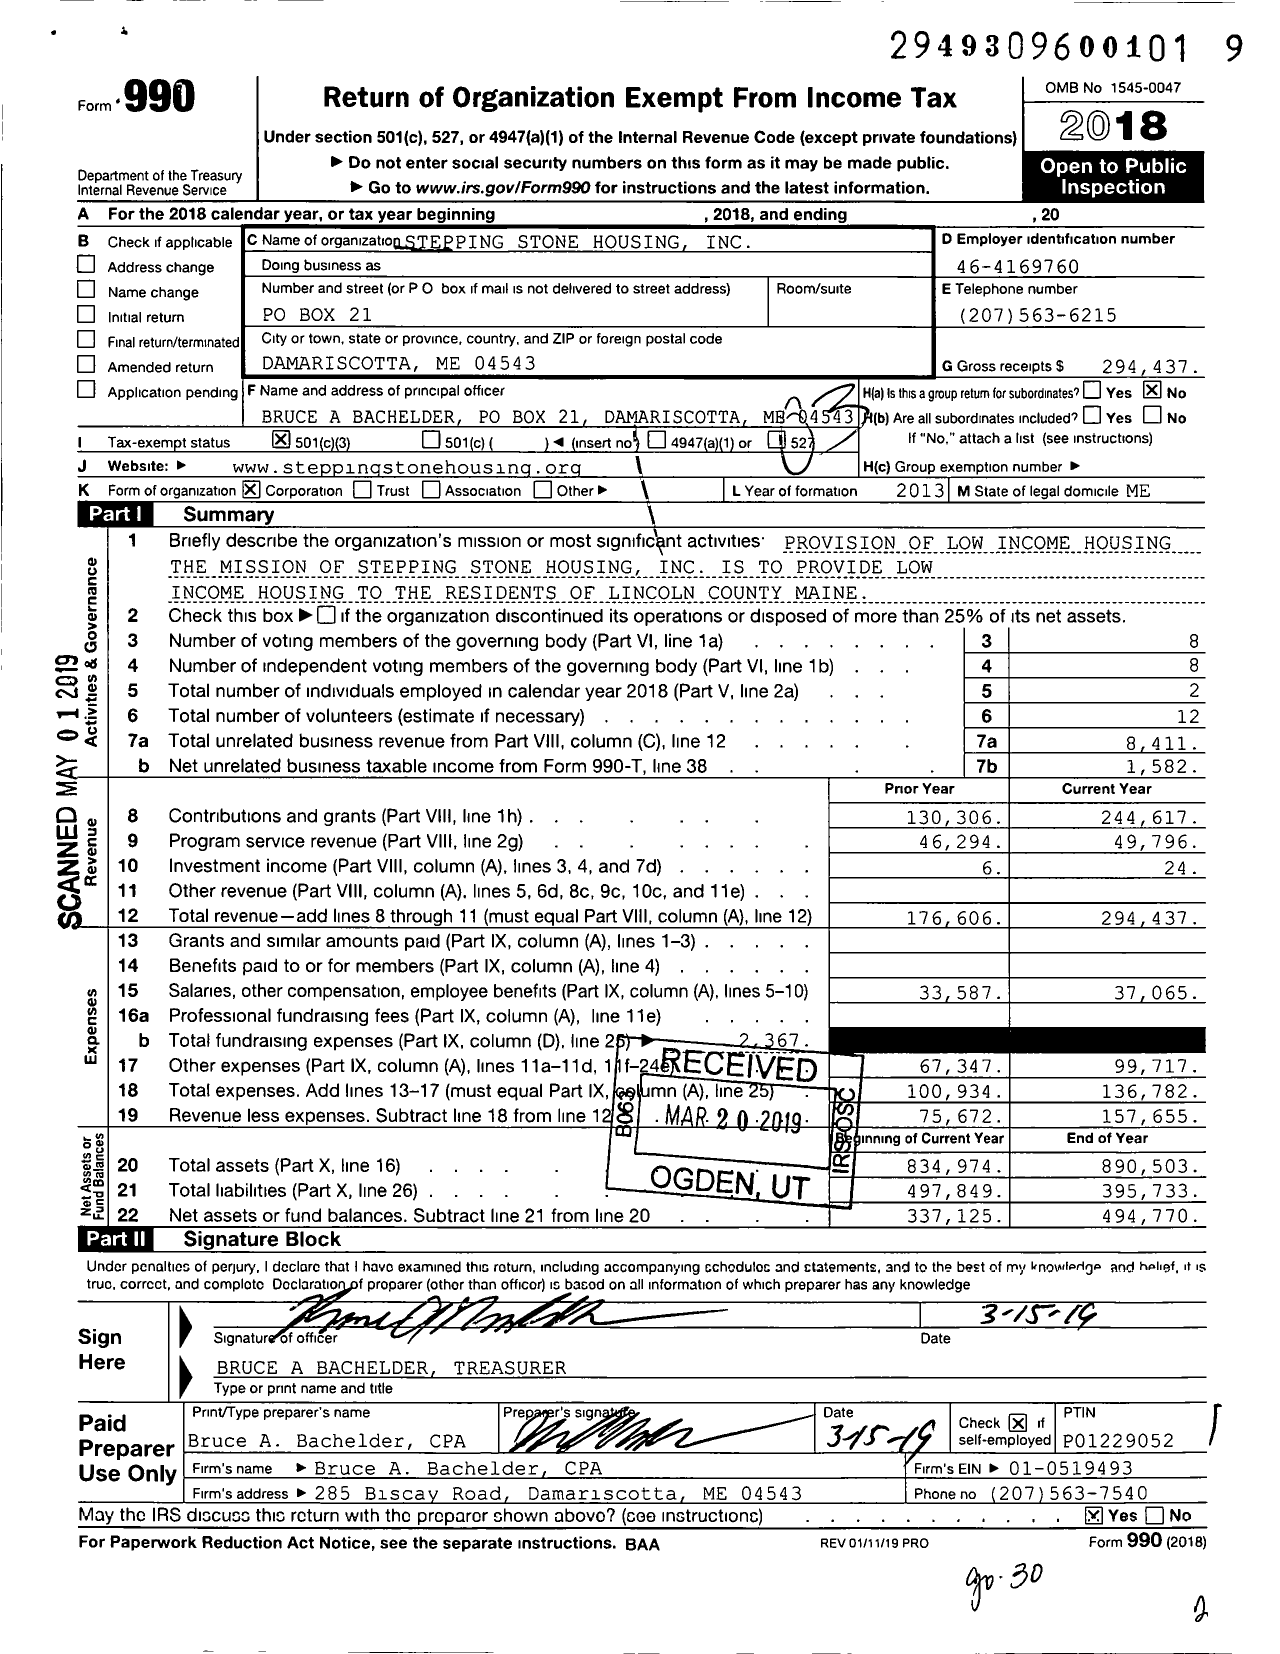 Image of first page of 2018 Form 990 for Stepping Stone Housing